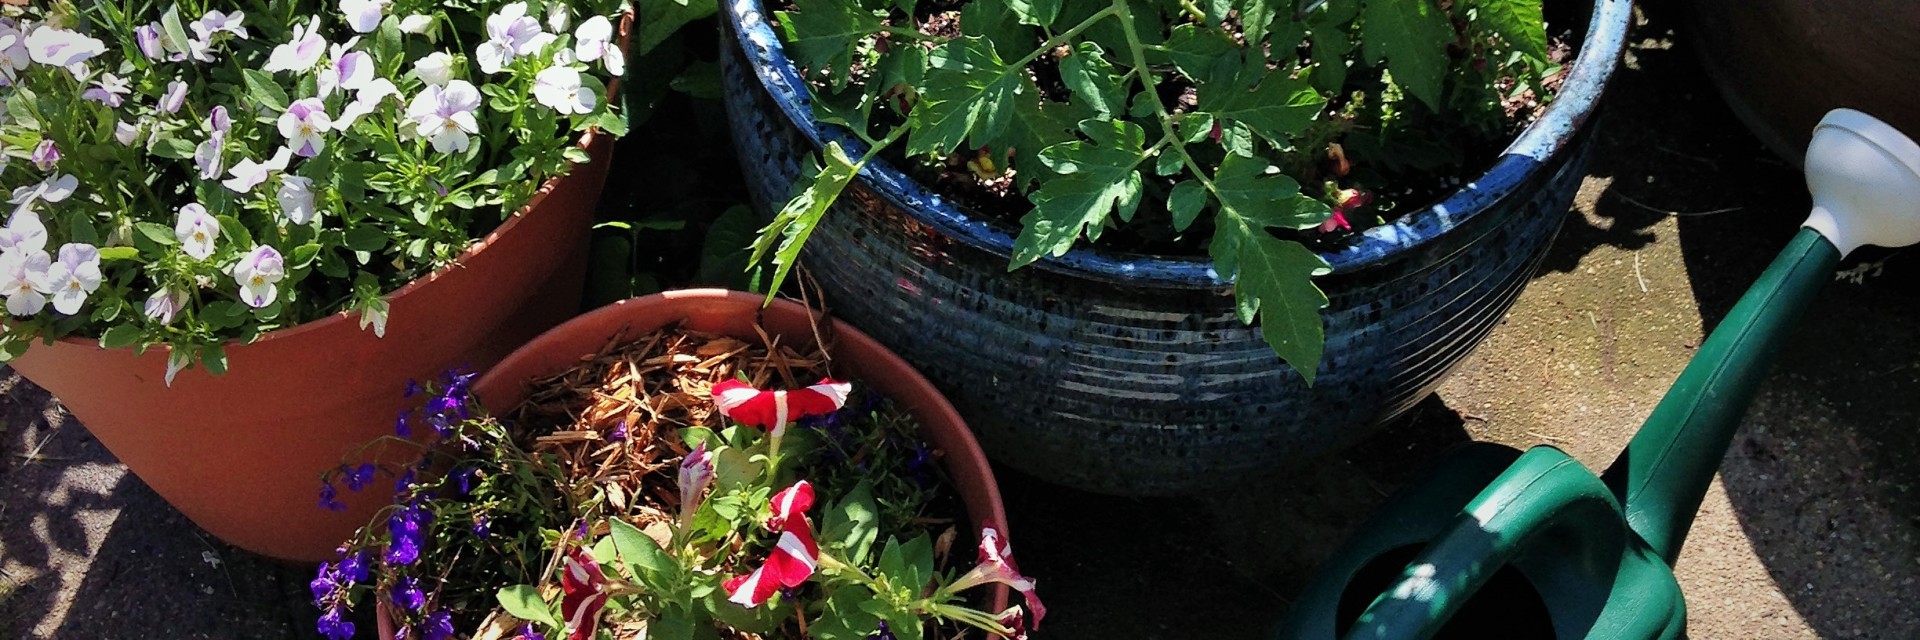 Christmas Ideas for the Gardener in Your Life!